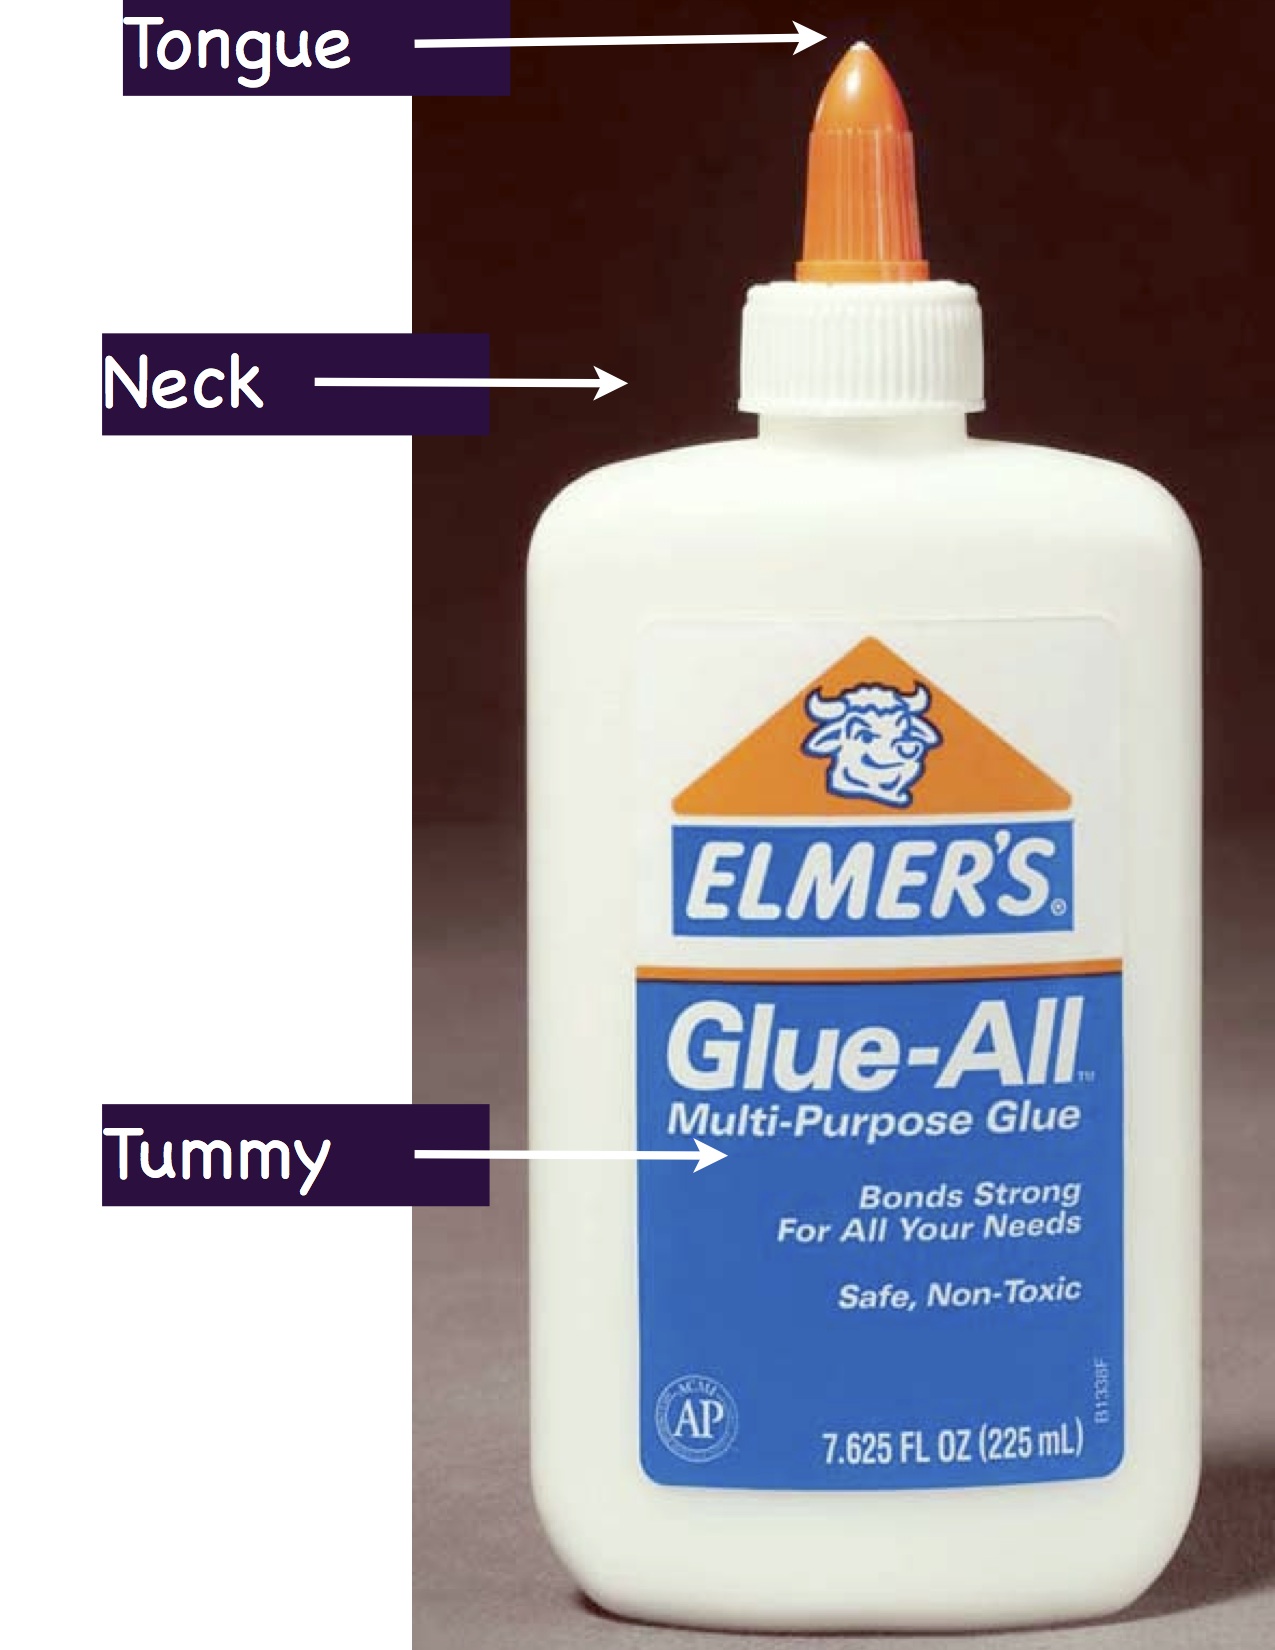 What The Heck Is My Favorite Glue Bottle and Why - Best of Many